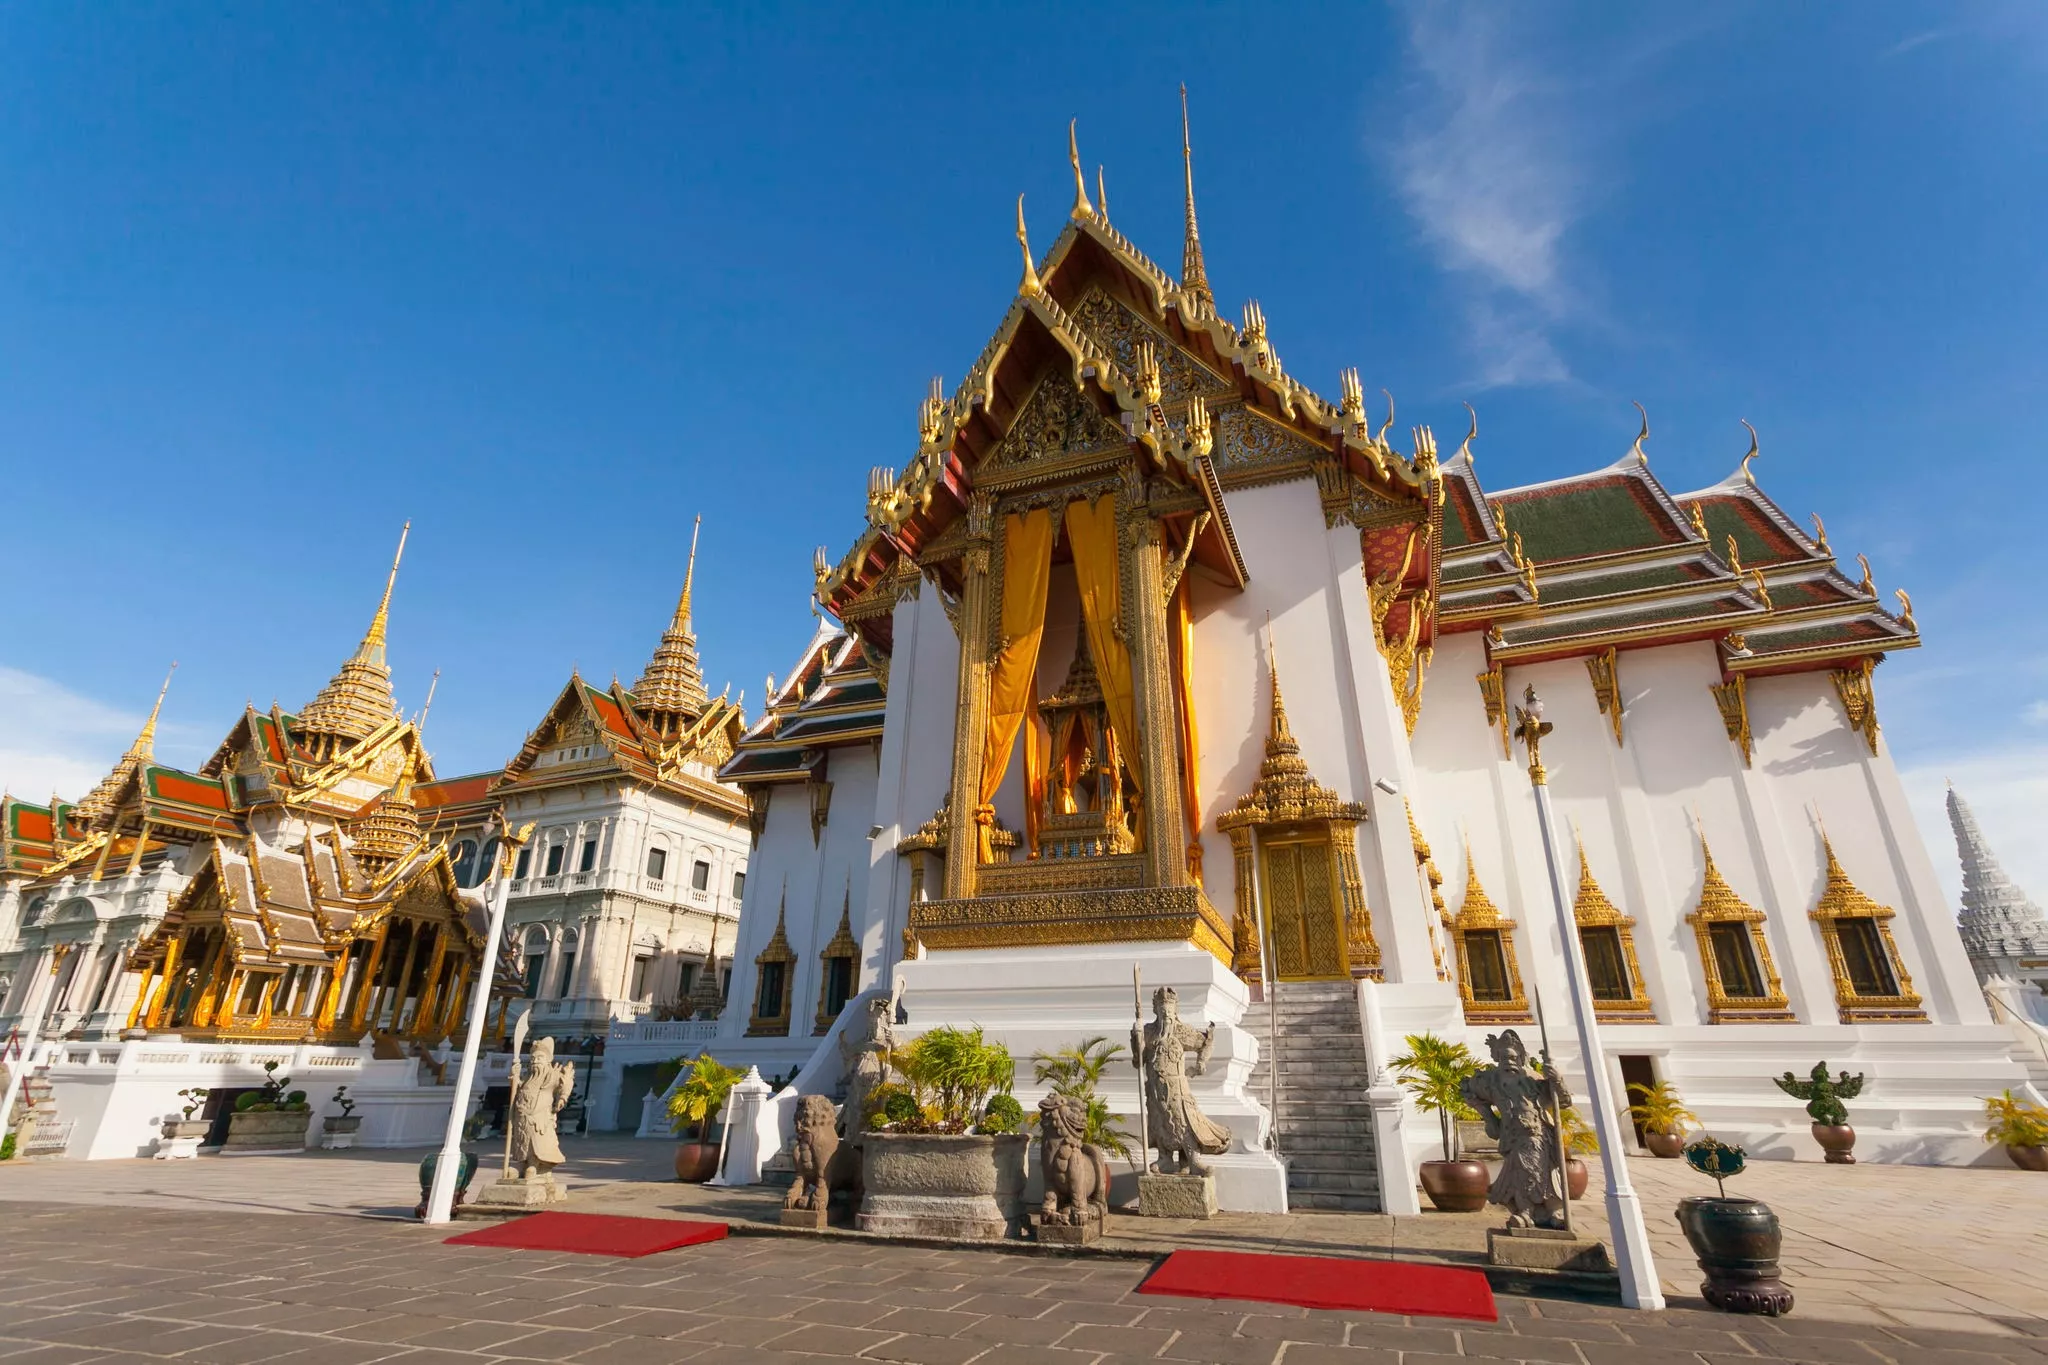 Grand Palace in Thailand, Central Asia | Museums,Architecture - Rated 4.7